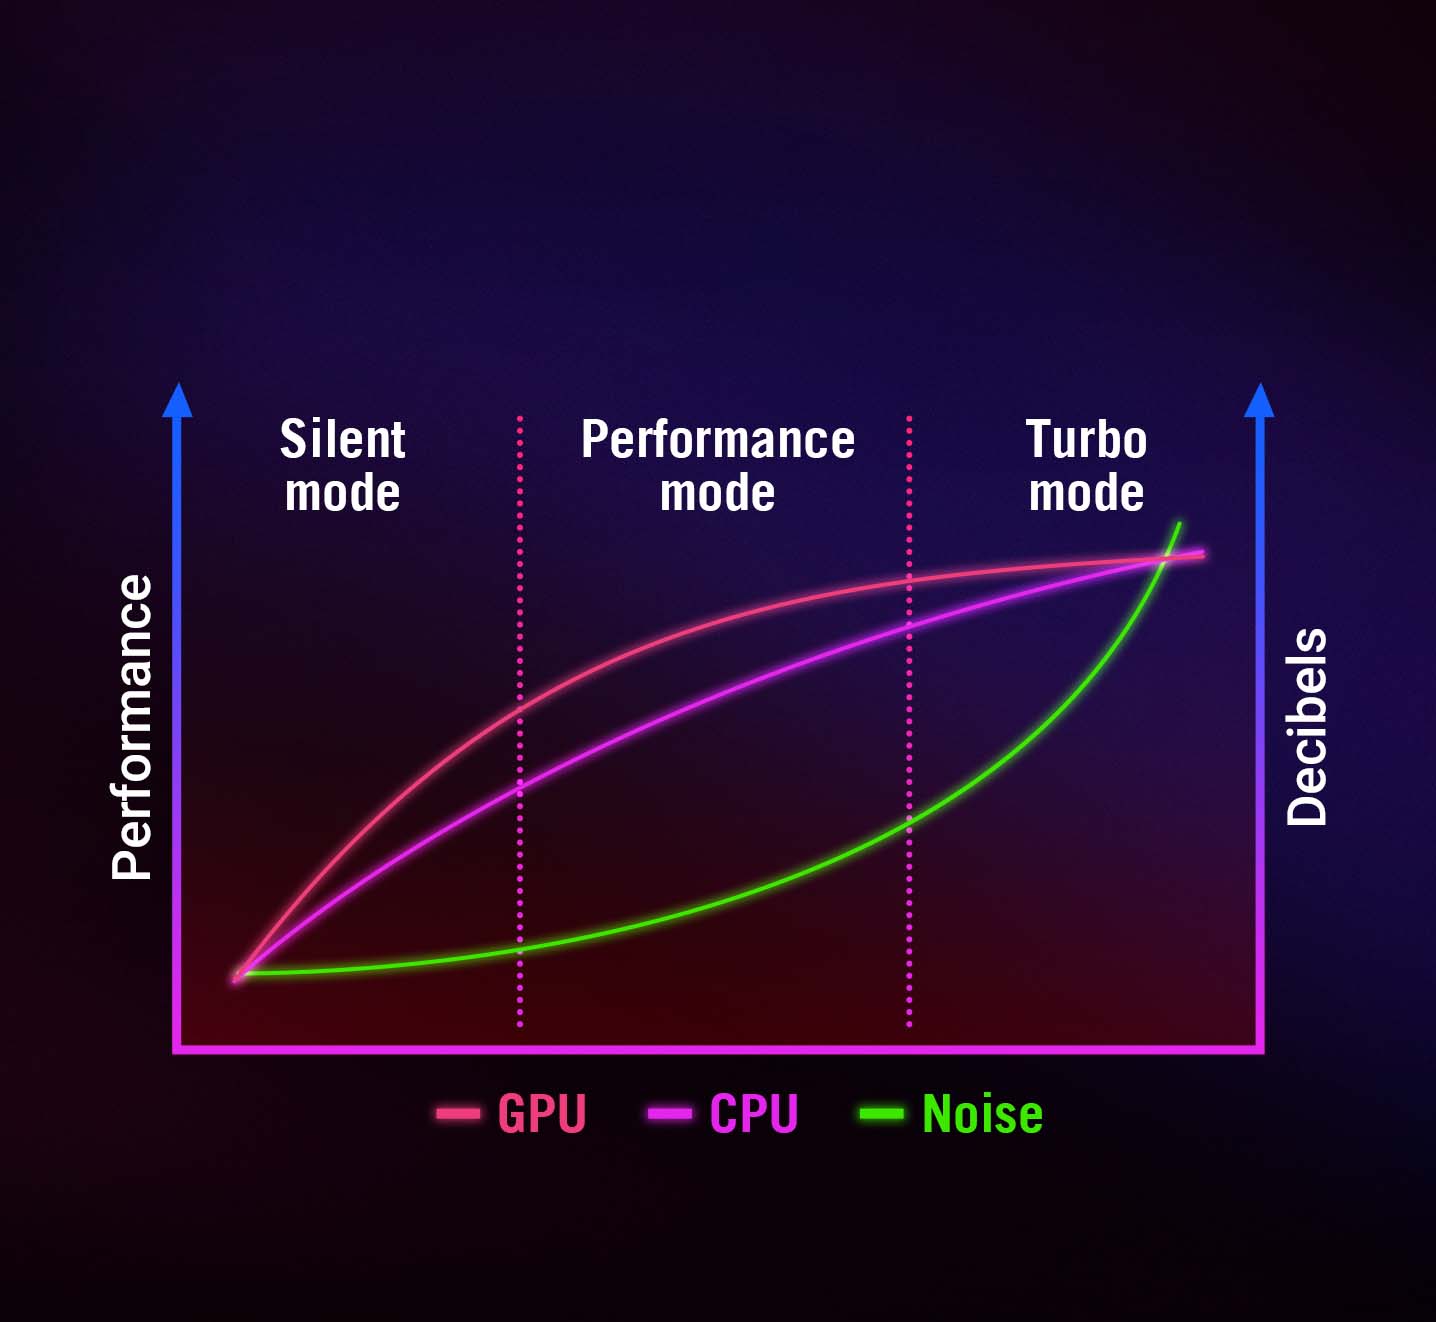 The image of performance and decibels chart